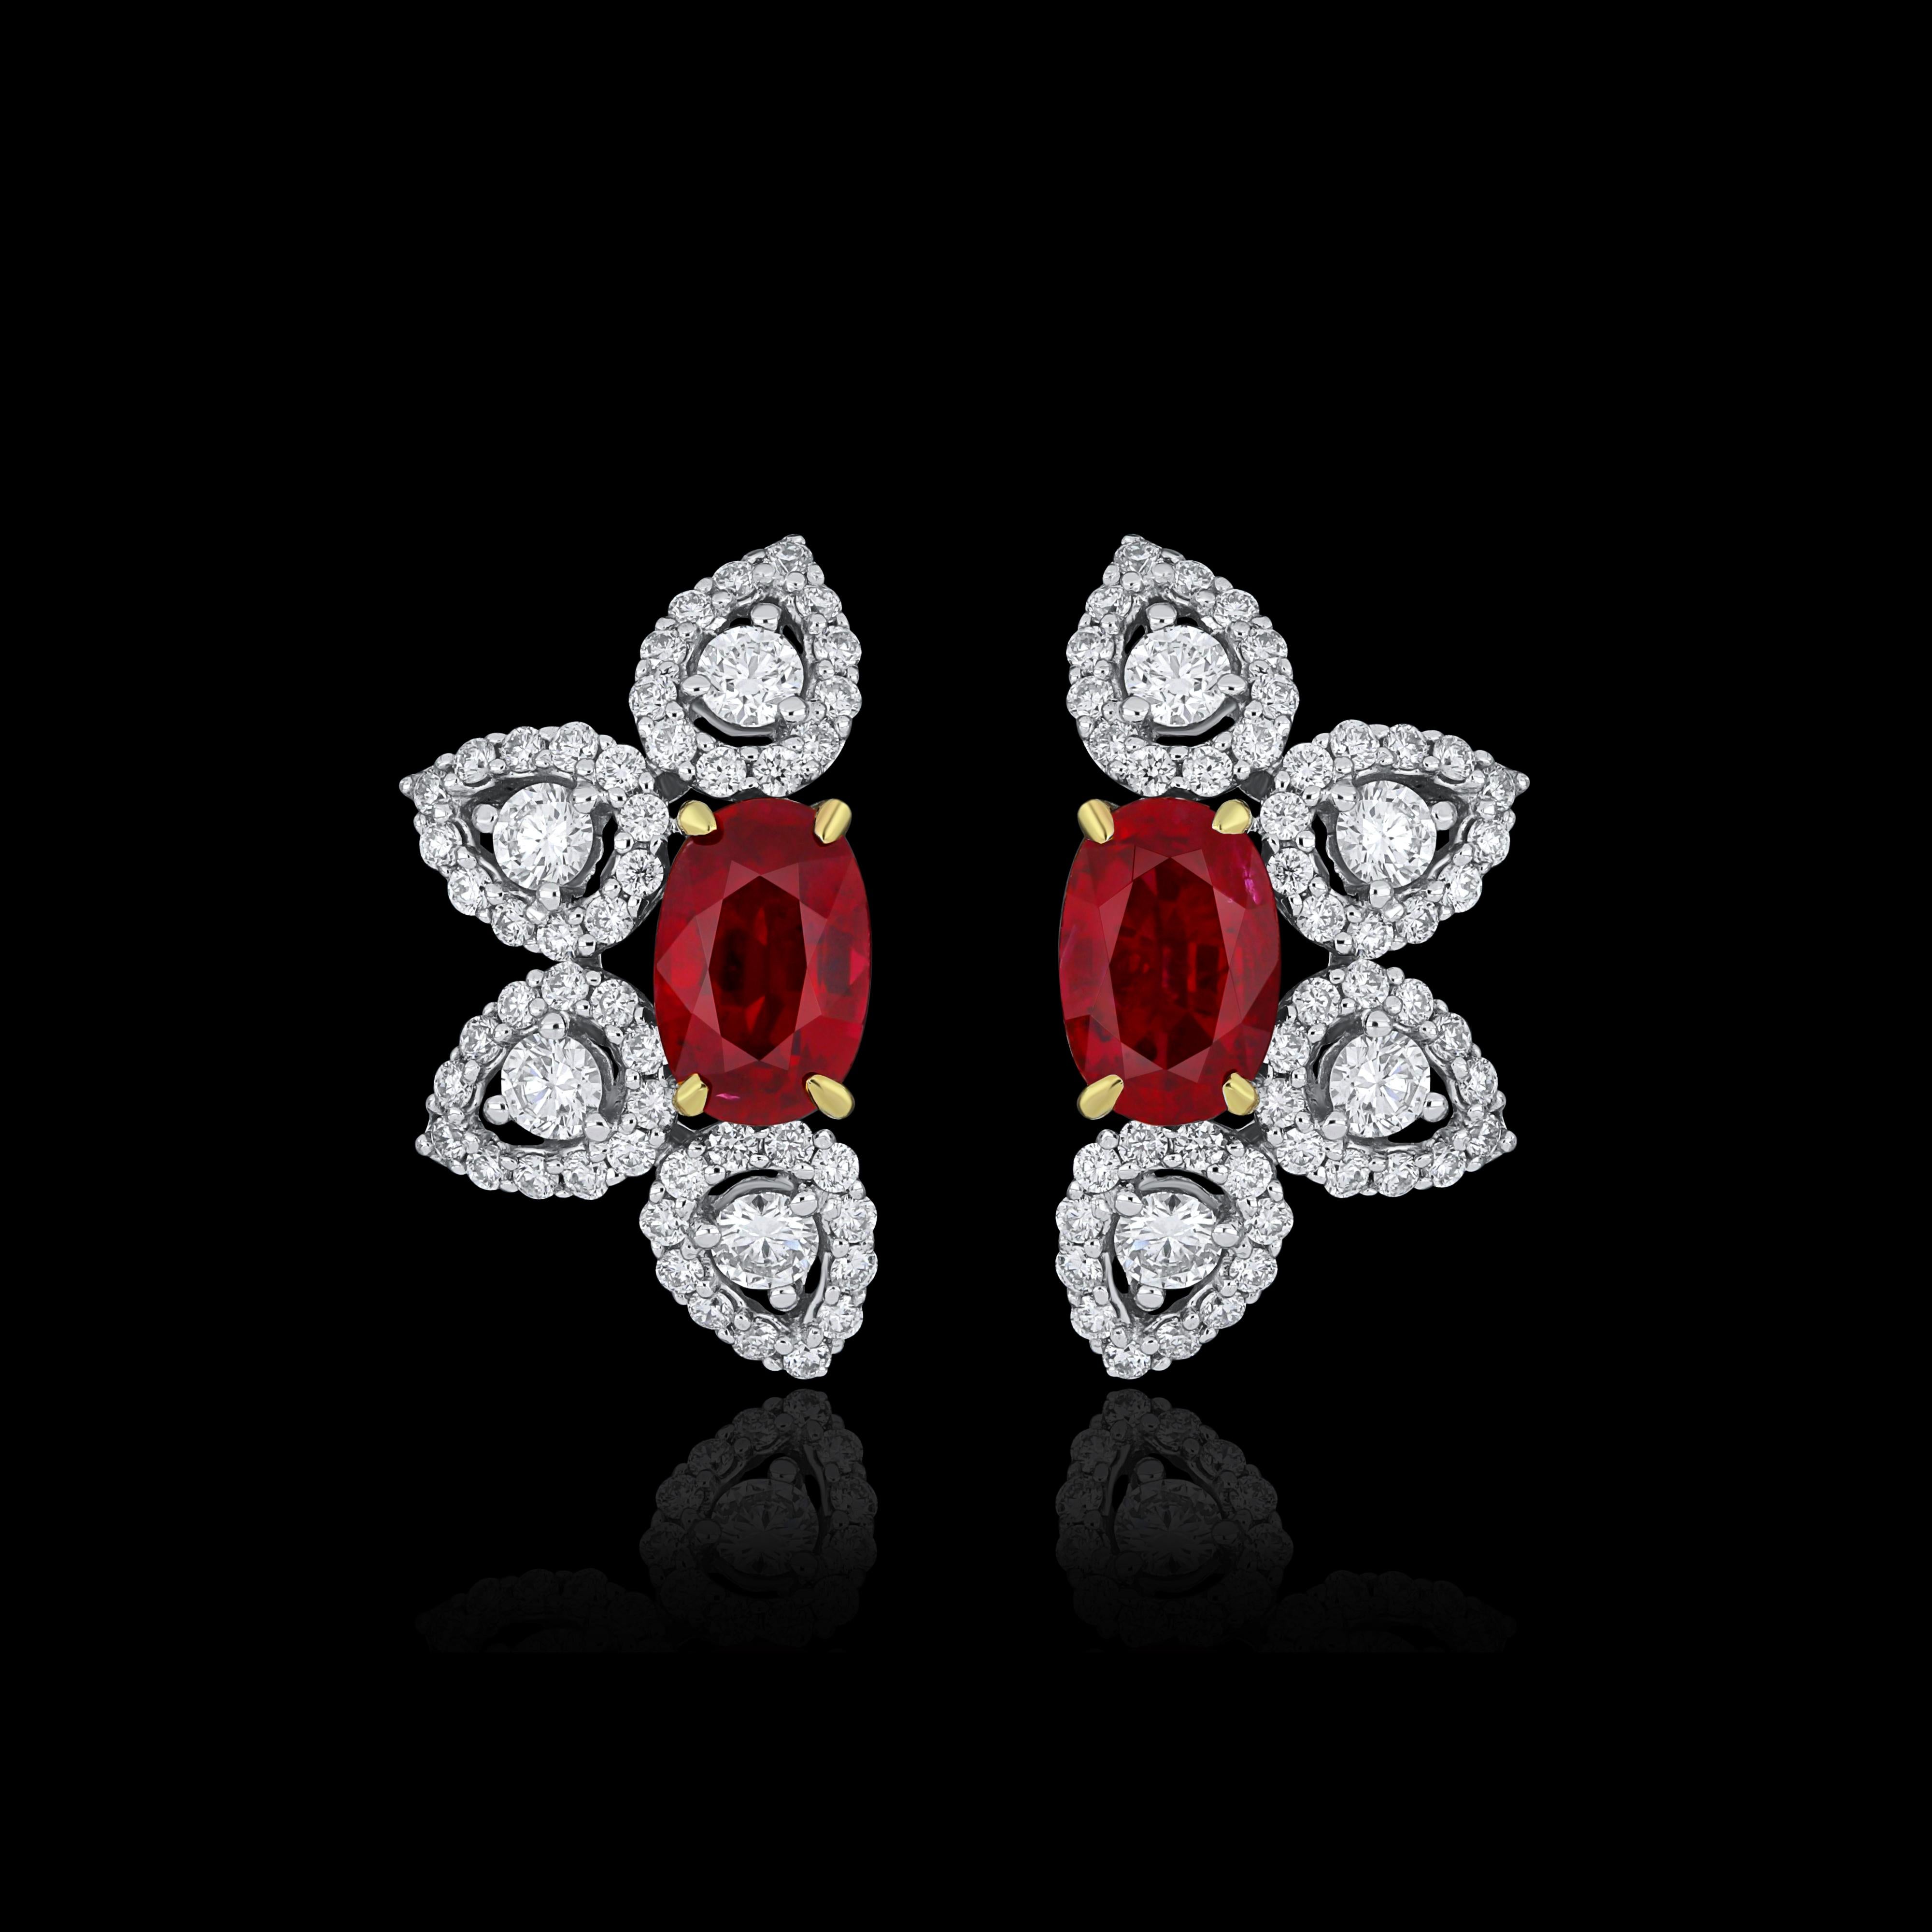 Elegant and exquisitely detailed 18 Karat White Gold Earring, center set with 1.12 Cts .Oval Shape Ruby Mozambique and micro pave set Diamonds, weighing approx. 0.62 Cts Beautifully Hand crafted in 18 Karat White Gold.

Stone Detail:
Ruby